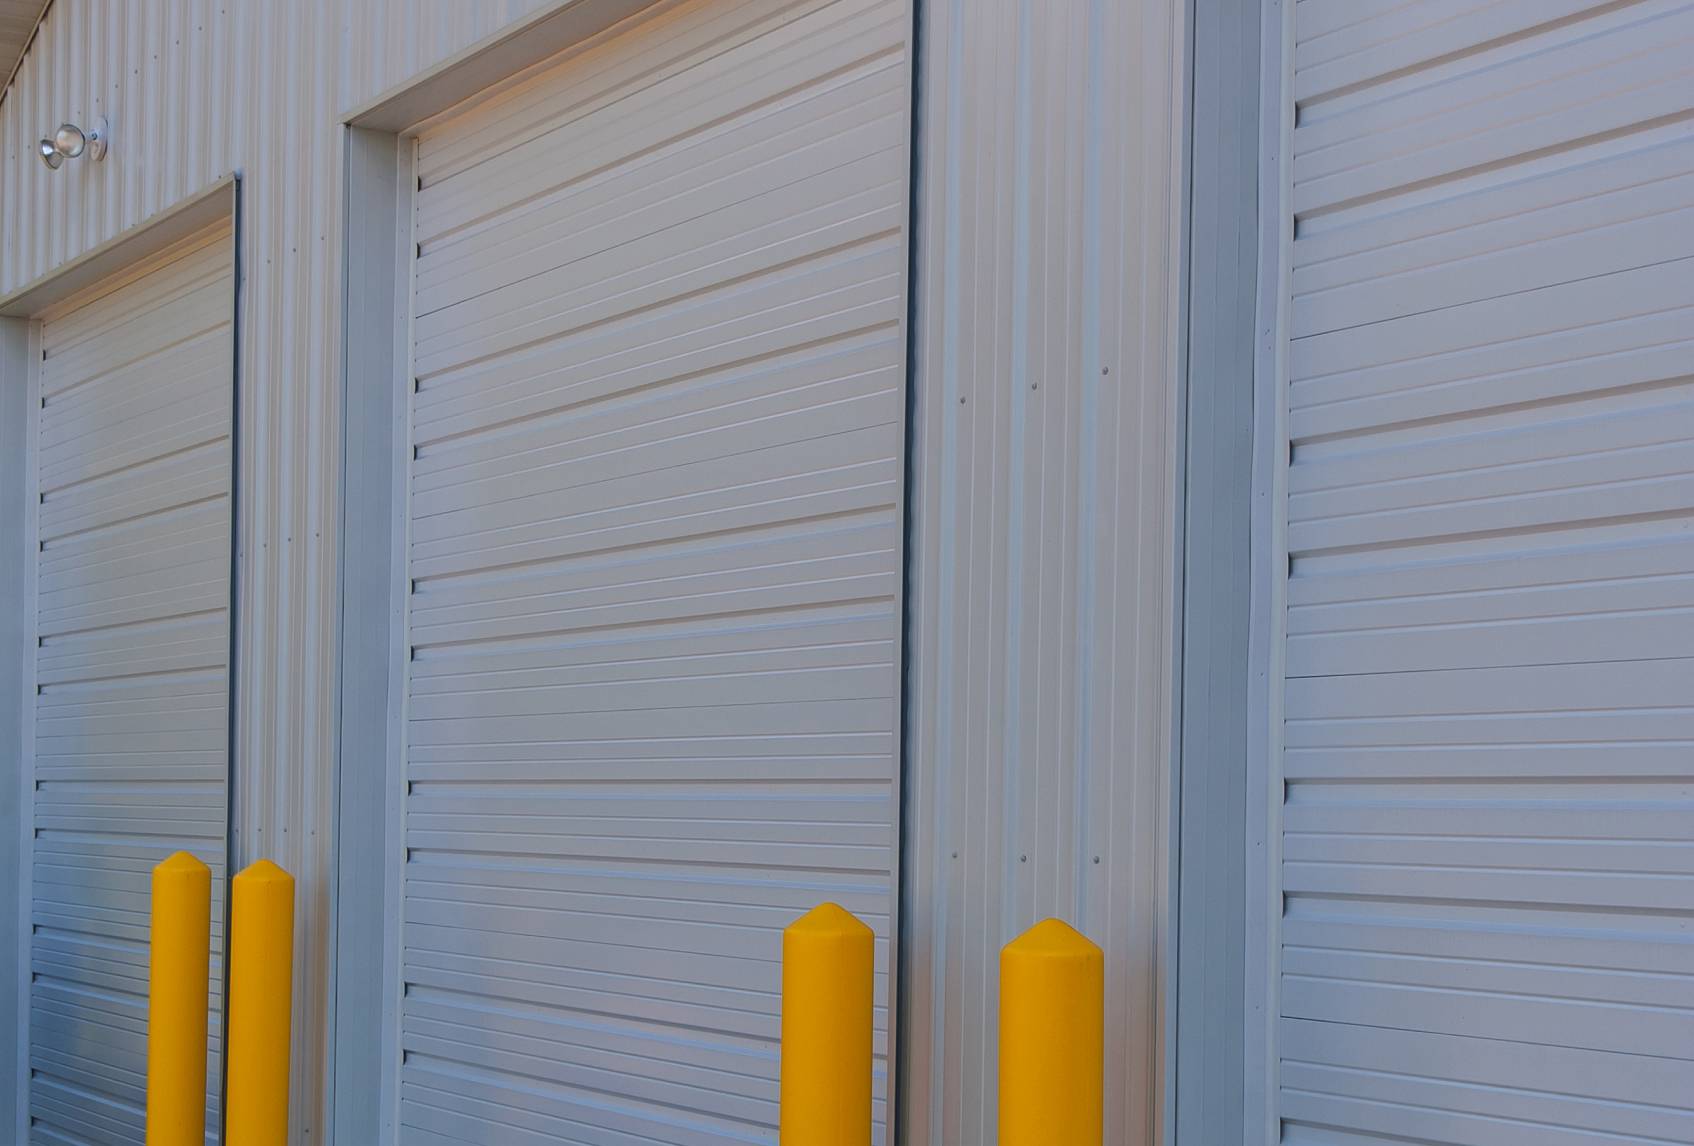 Ribbed steel garage door for commercial use